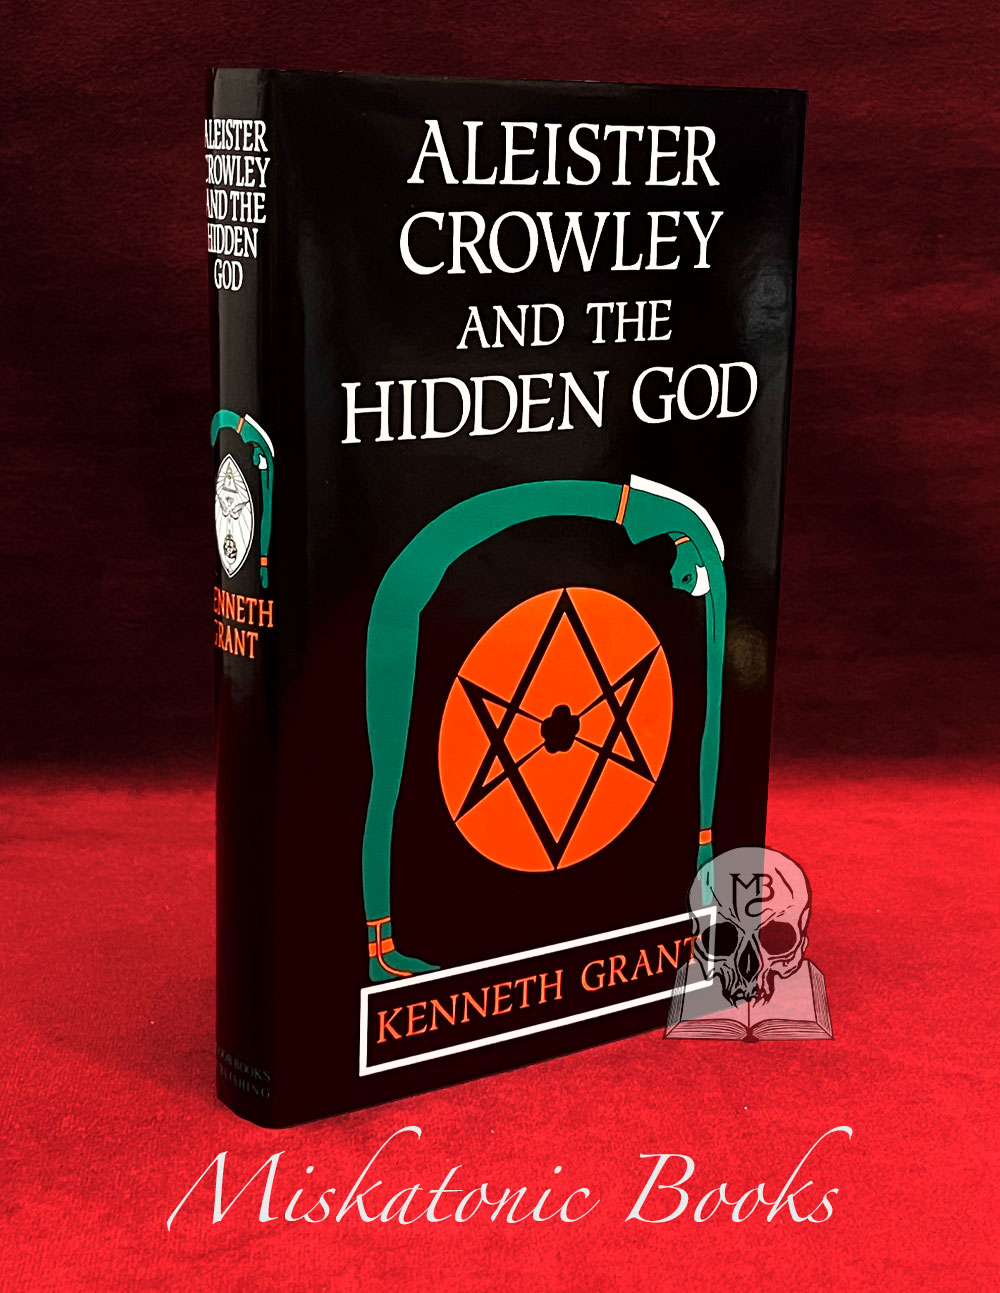 ALEISTER CROWLEY AND THE HIDDEN GOD by Kenneth Grant (Hardcover Edition)